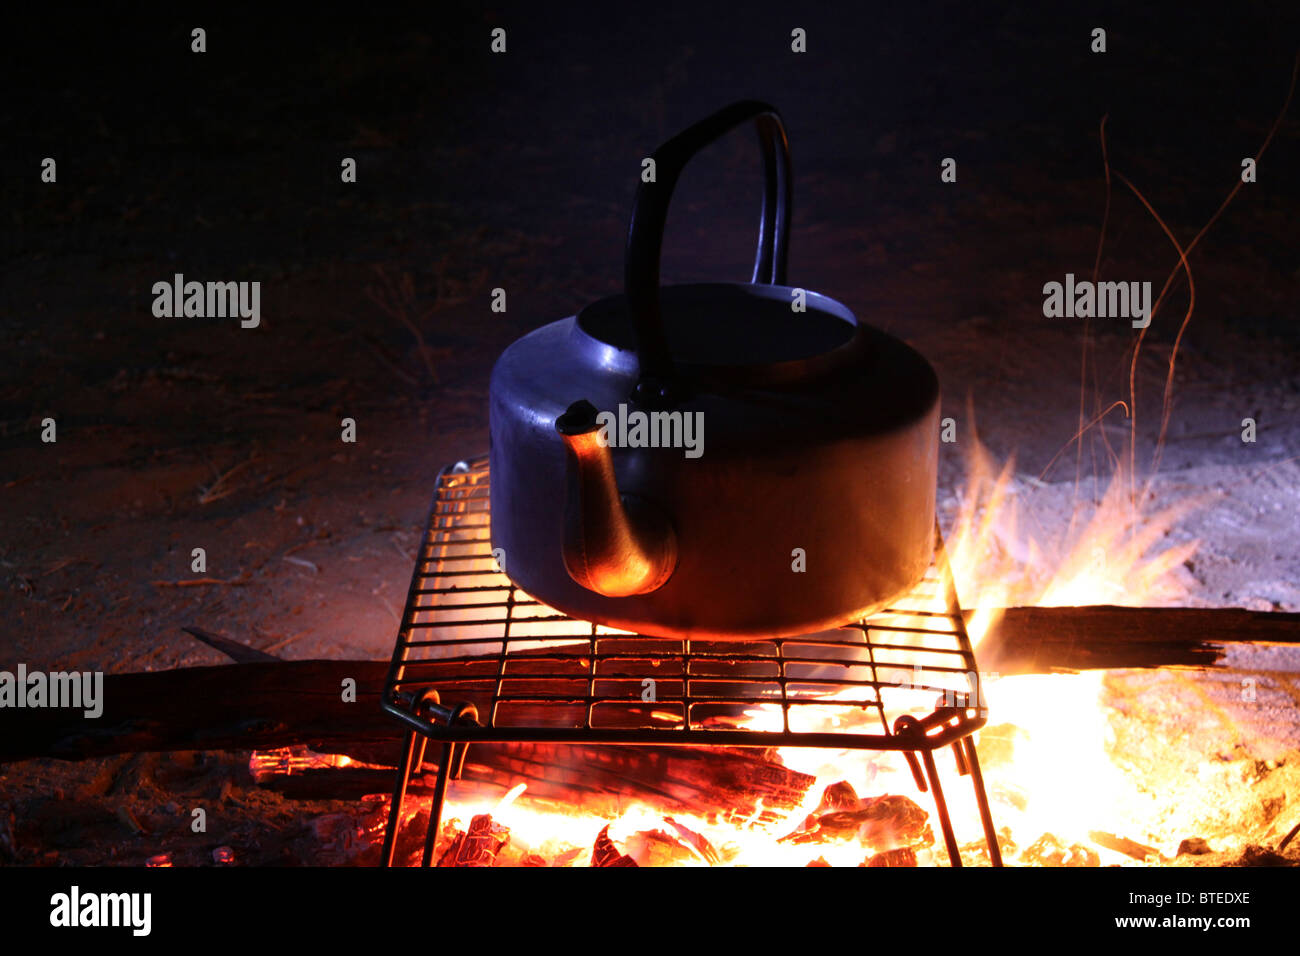 https://c8.alamy.com/comp/BTEDXE/a-kettle-on-a-grid-with-a-log-fire-beneath-it-BTEDXE.jpg